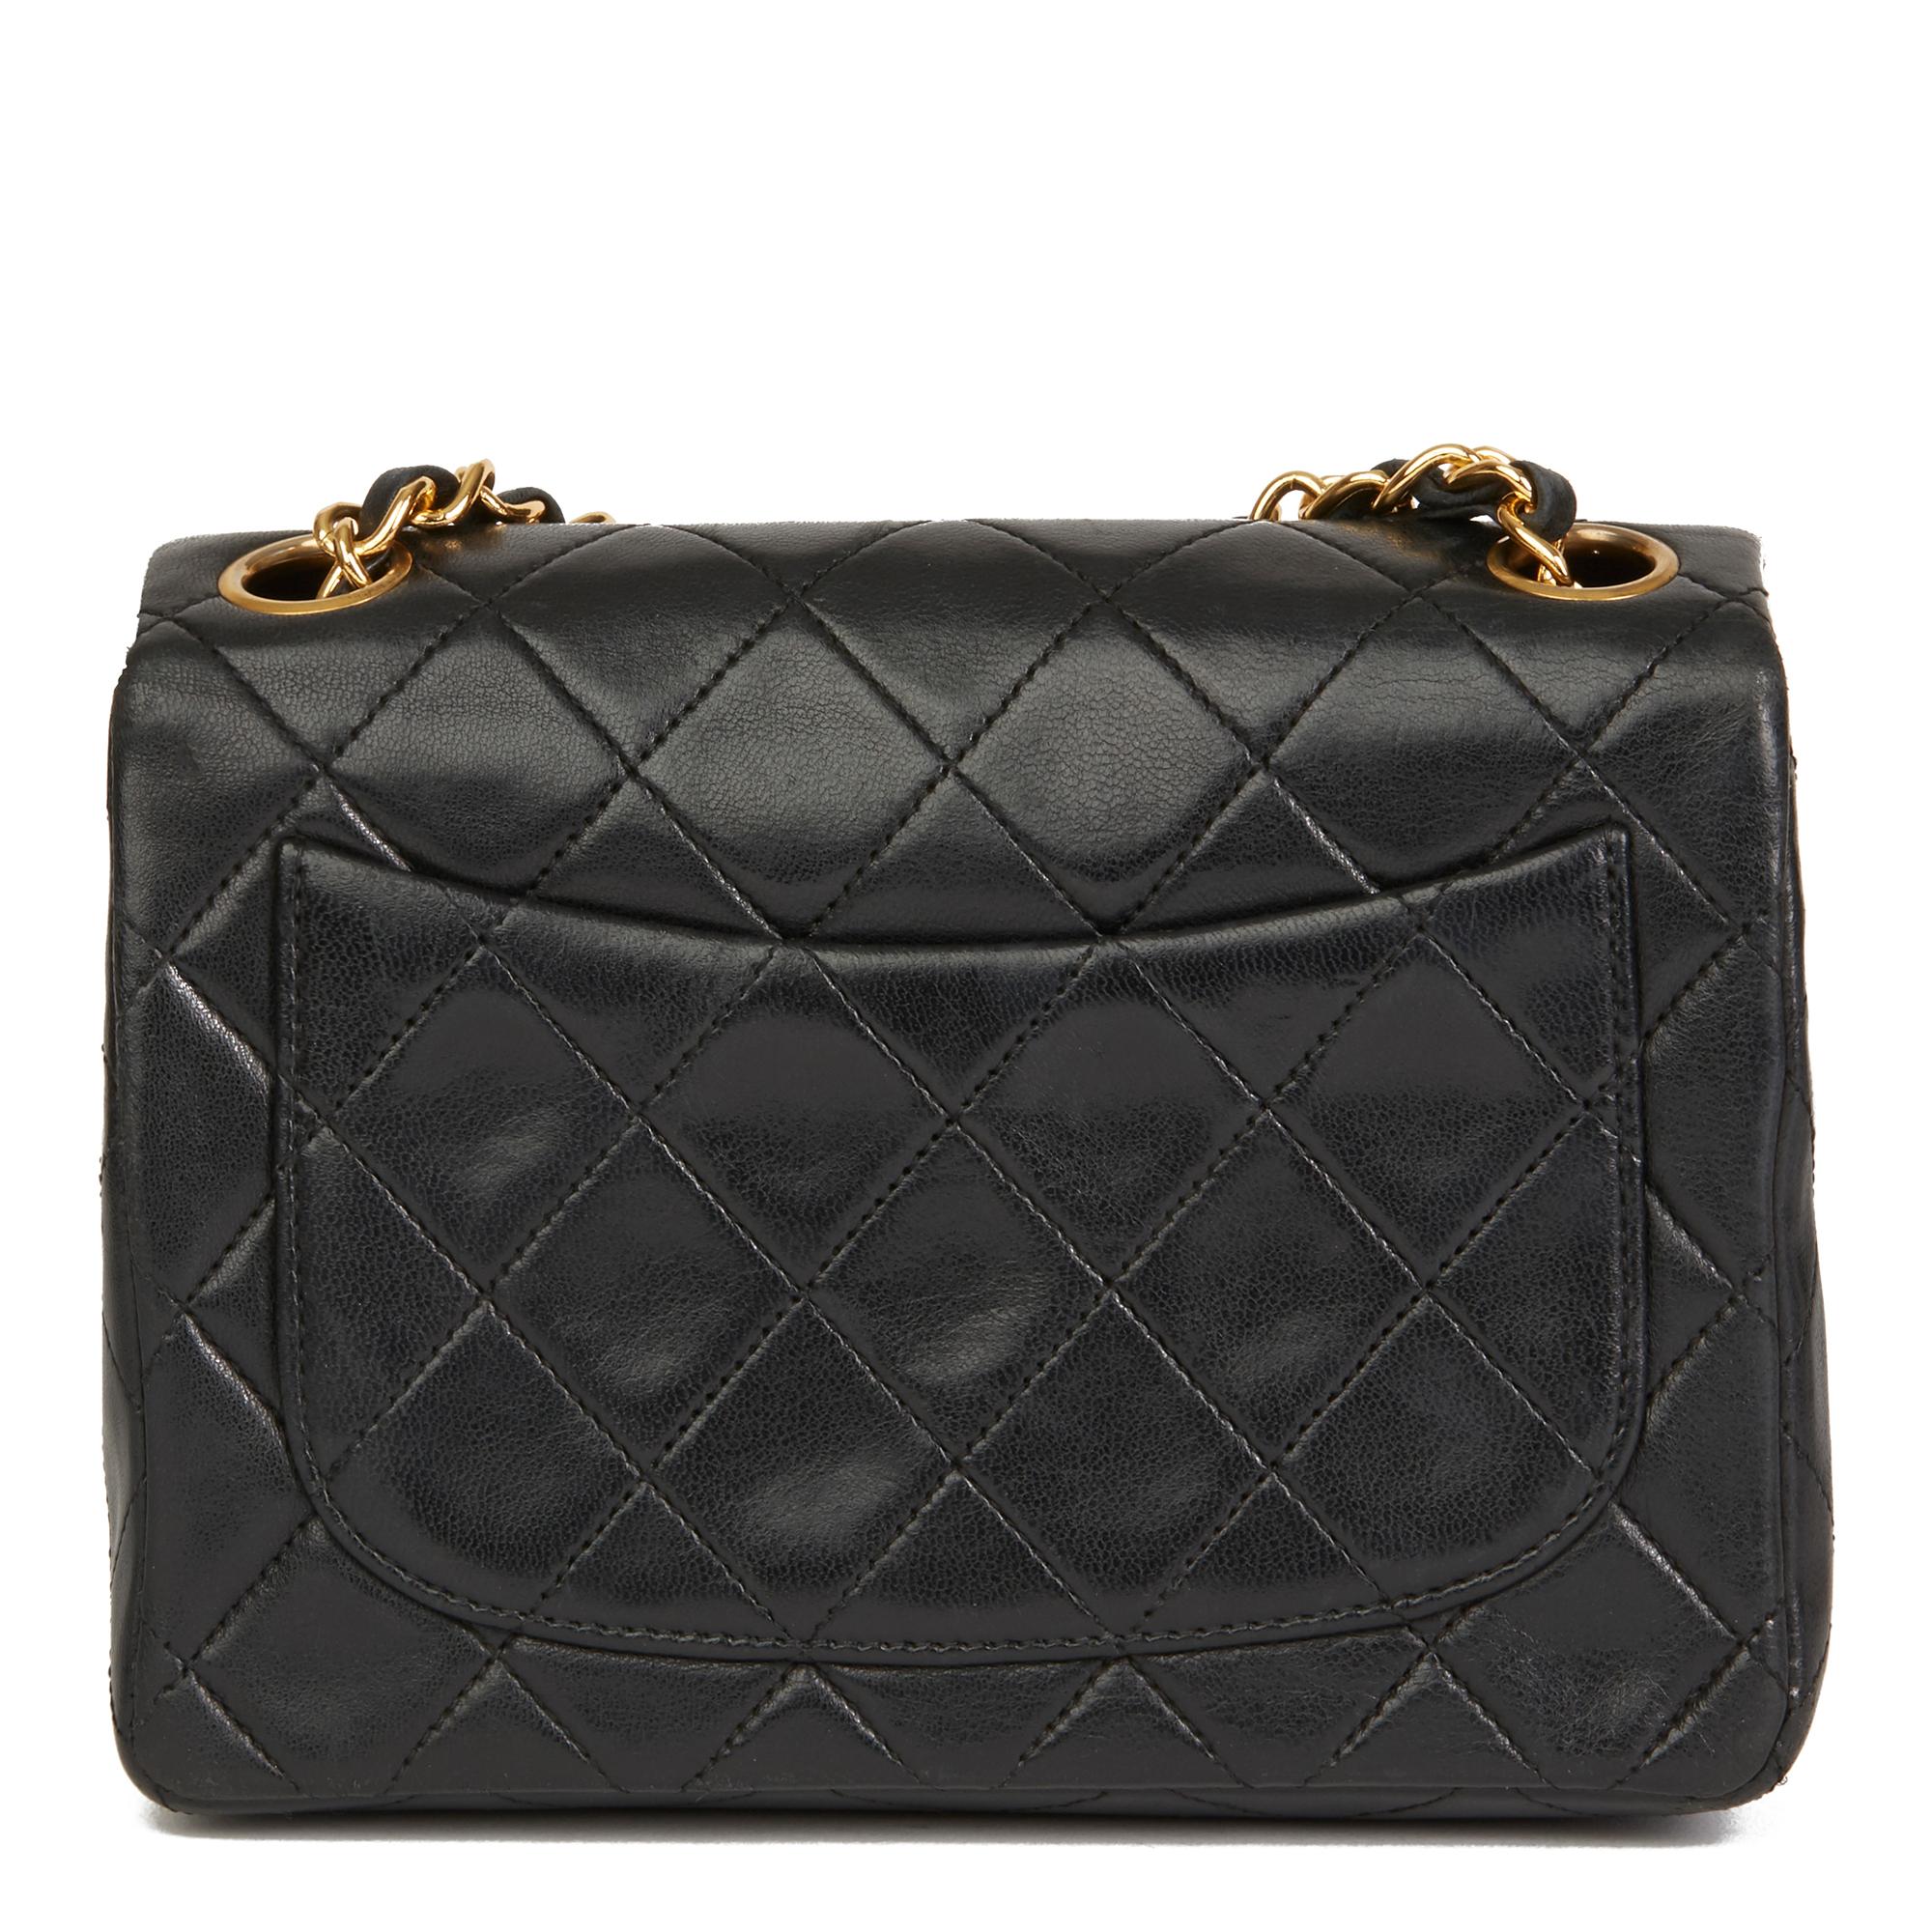 Women's 1989 Chanel Black Quilted Lambskin Vintage Mini Flap Bag